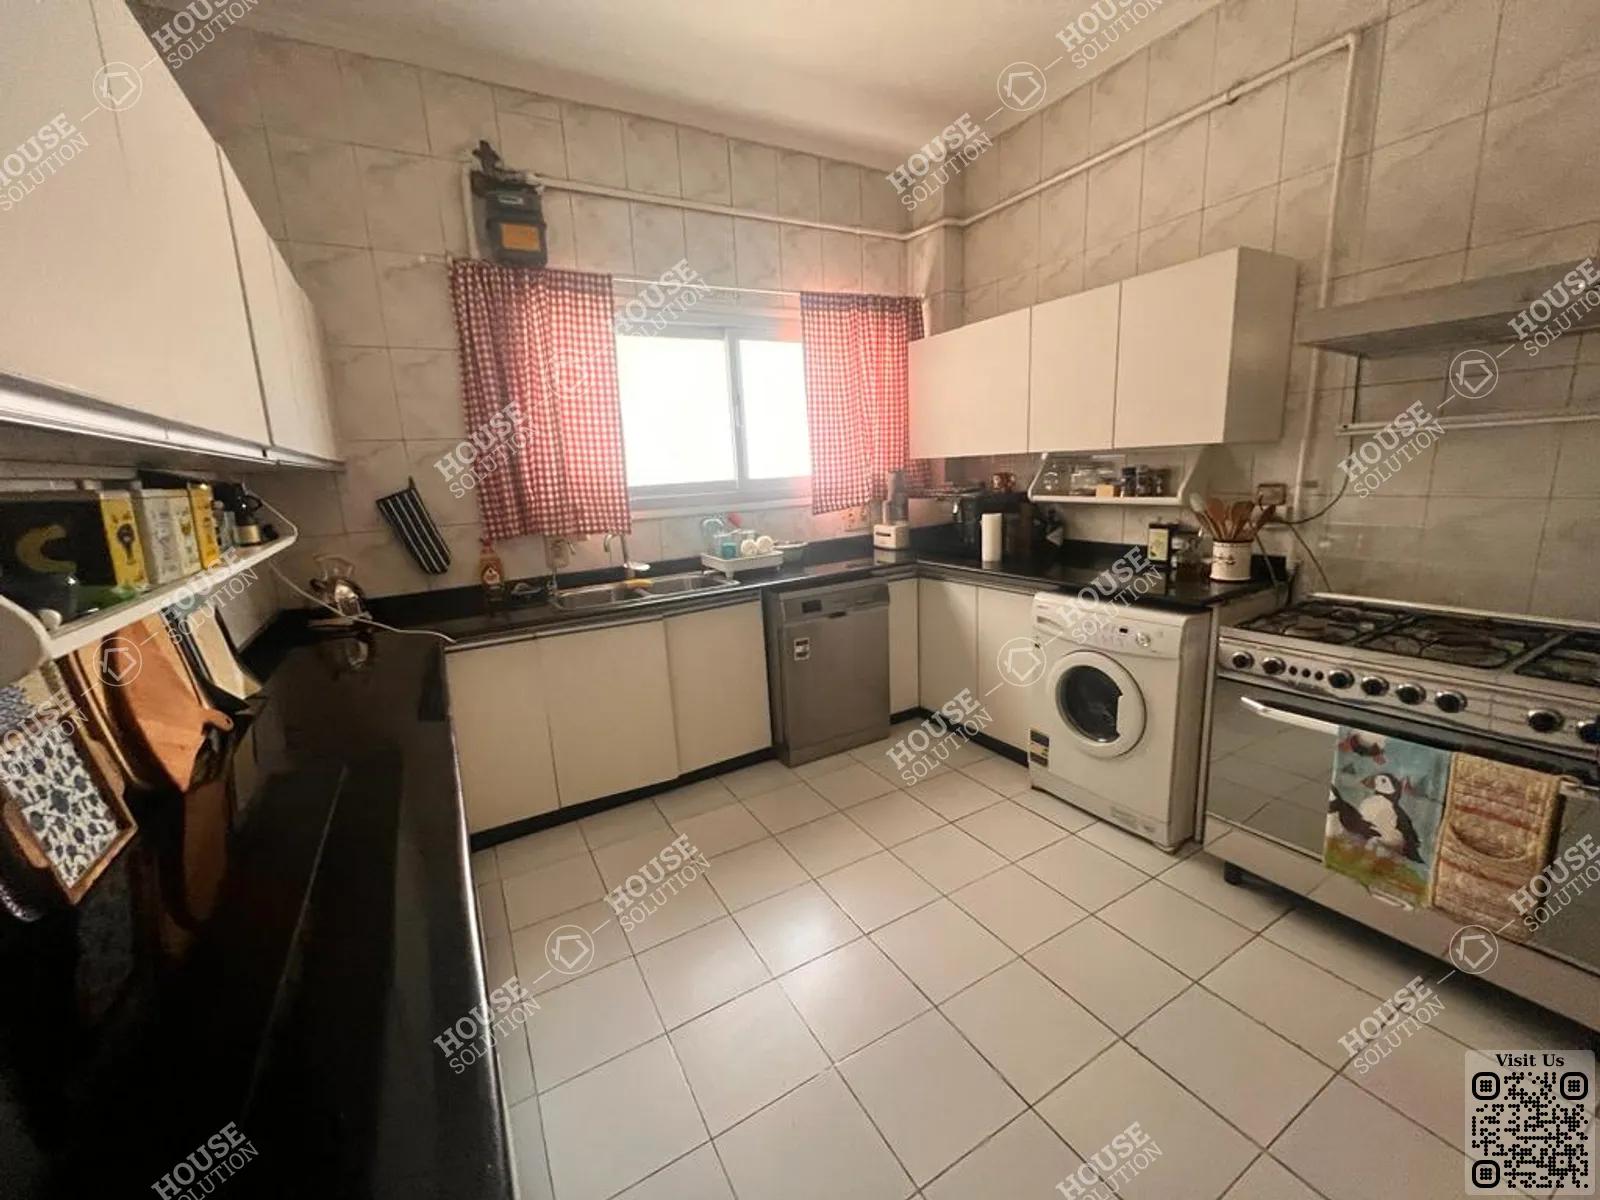 KITCHEN  @ Apartments For Rent In Maadi Maadi Sarayat Area: 300 m² consists of 3 Bedrooms 3 Bathrooms Modern furnished 5 stars #4240-2